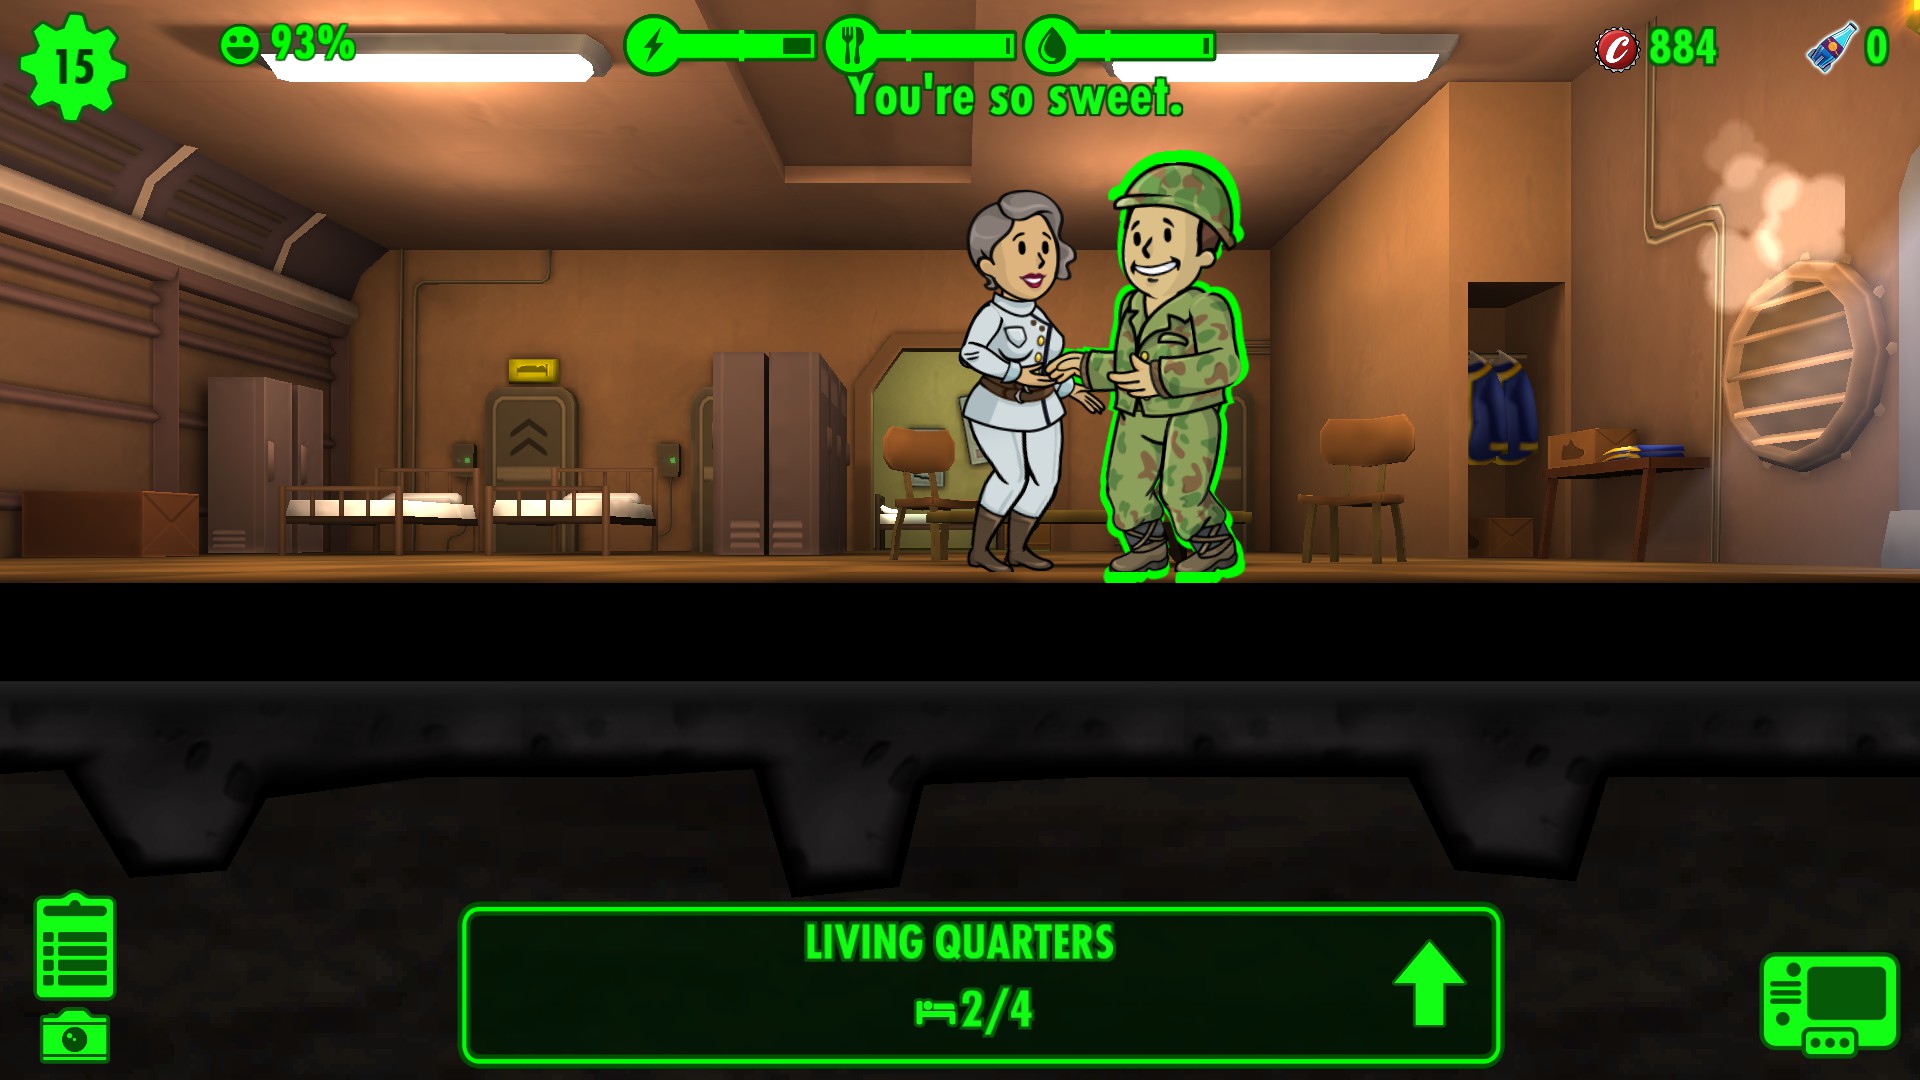 fallout shelter steam download